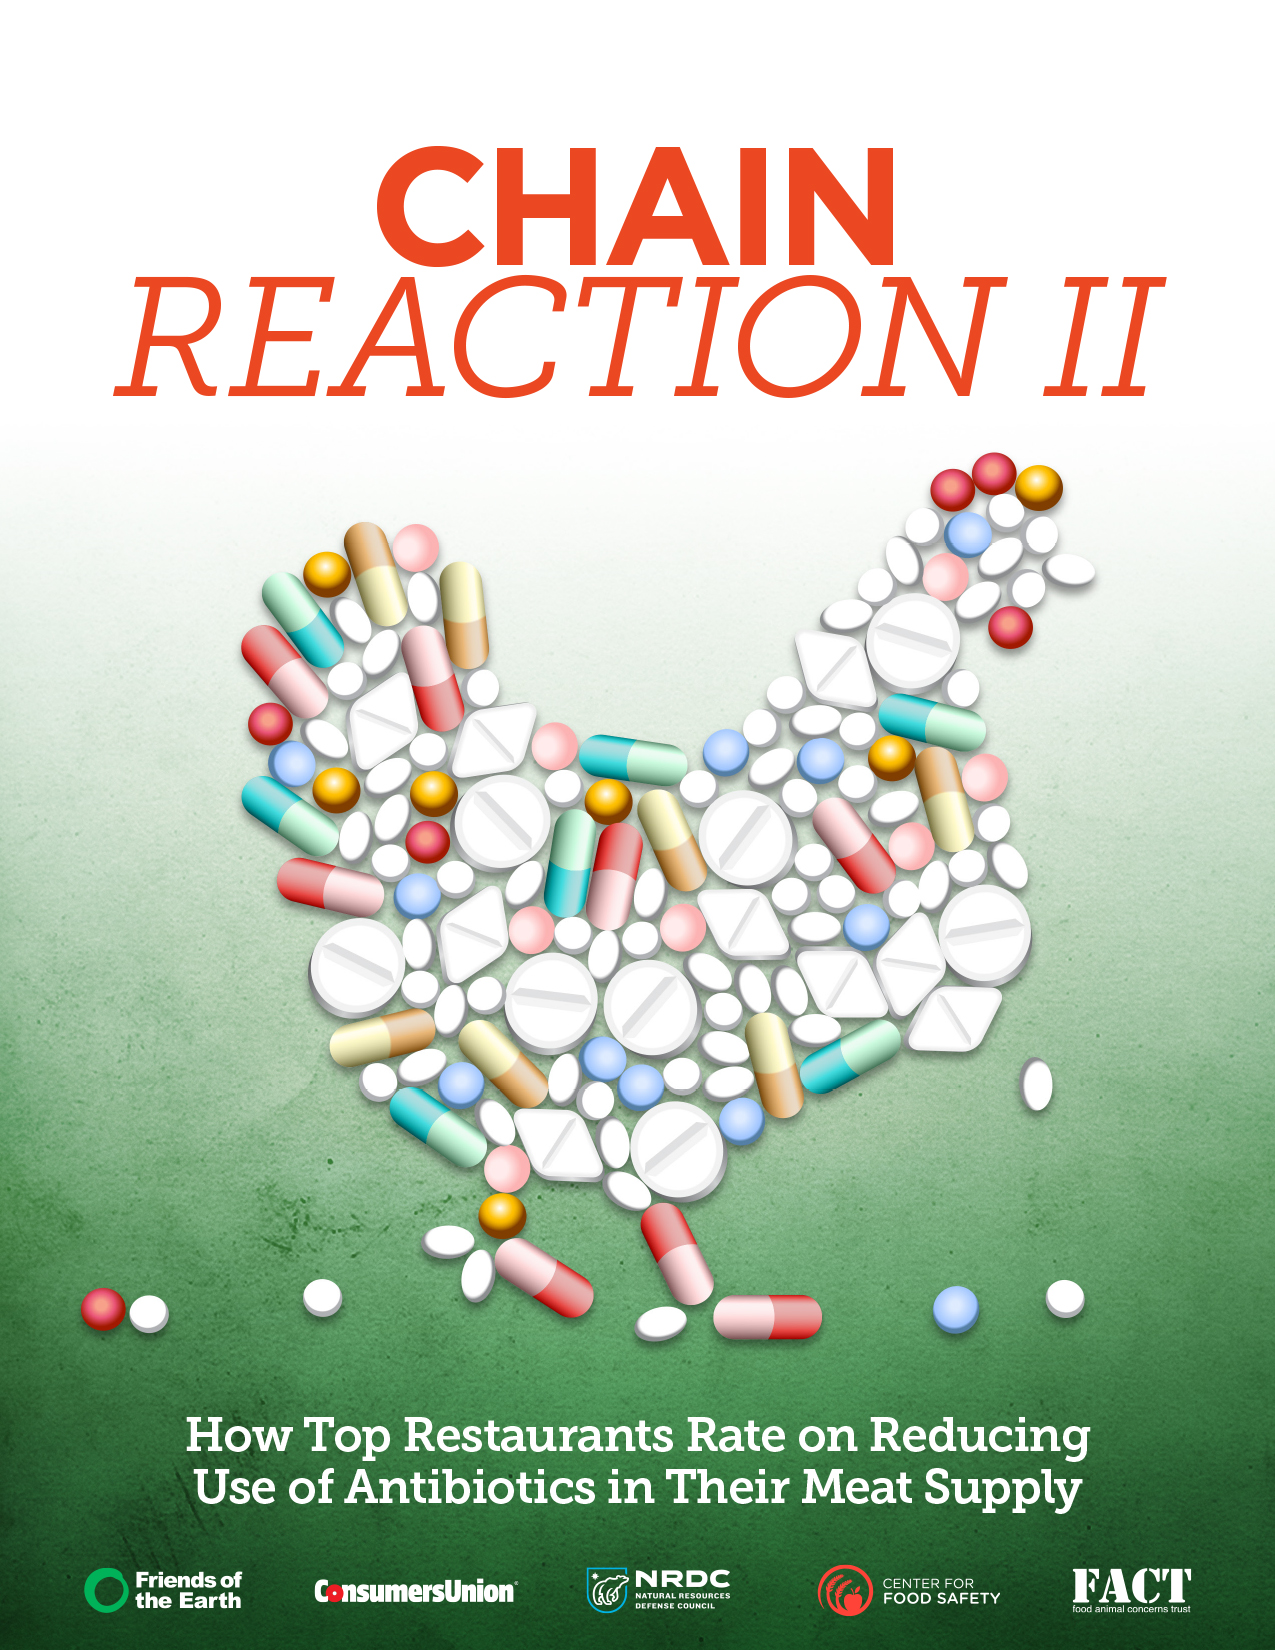 Chain Reaction II: How Top Restaurants Rate on Reducing Use of Antibiotics in Their Meat Supply